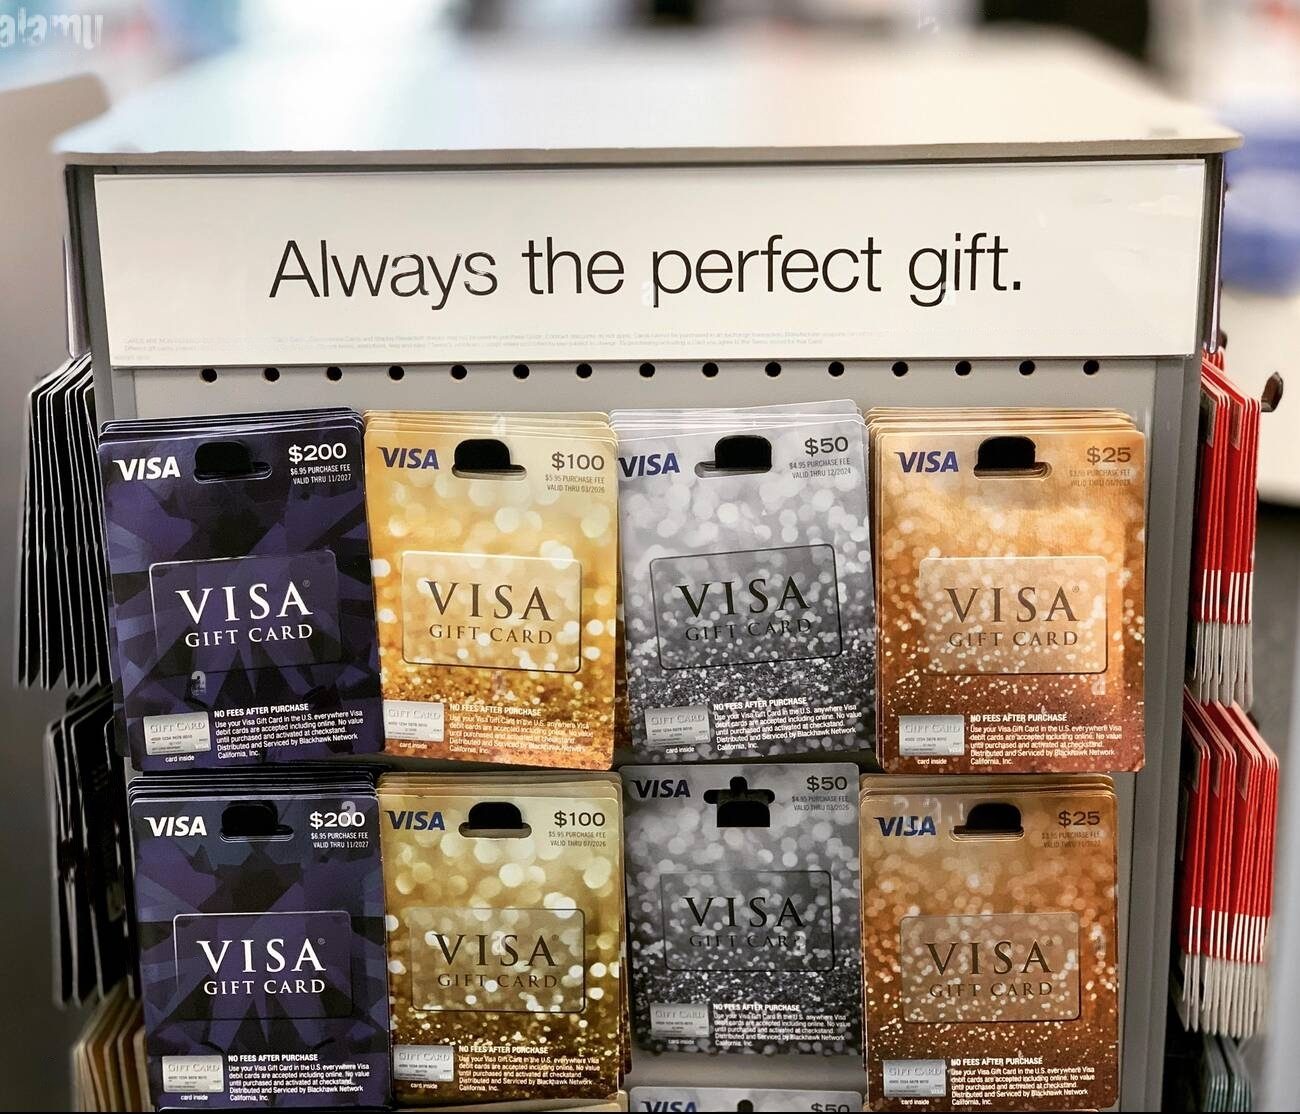 How Much Money Can You Load on Visa Gift Cards & Where to Spend